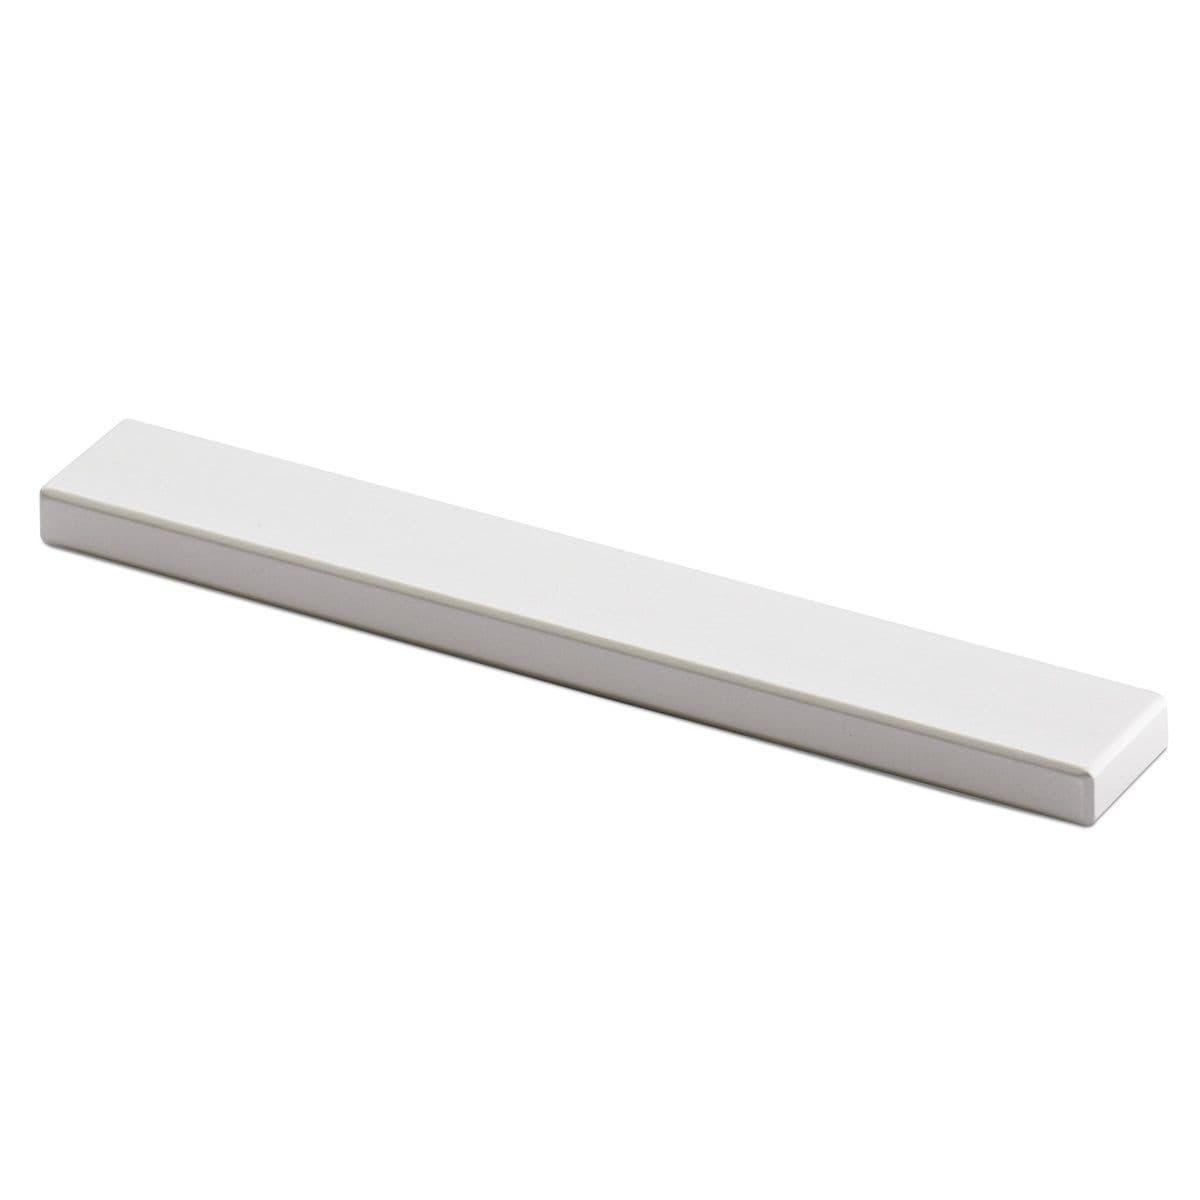 STABIA PULL Cupboard Handle - 5 sizes - 3 finishes (HETTICH - New Modern)